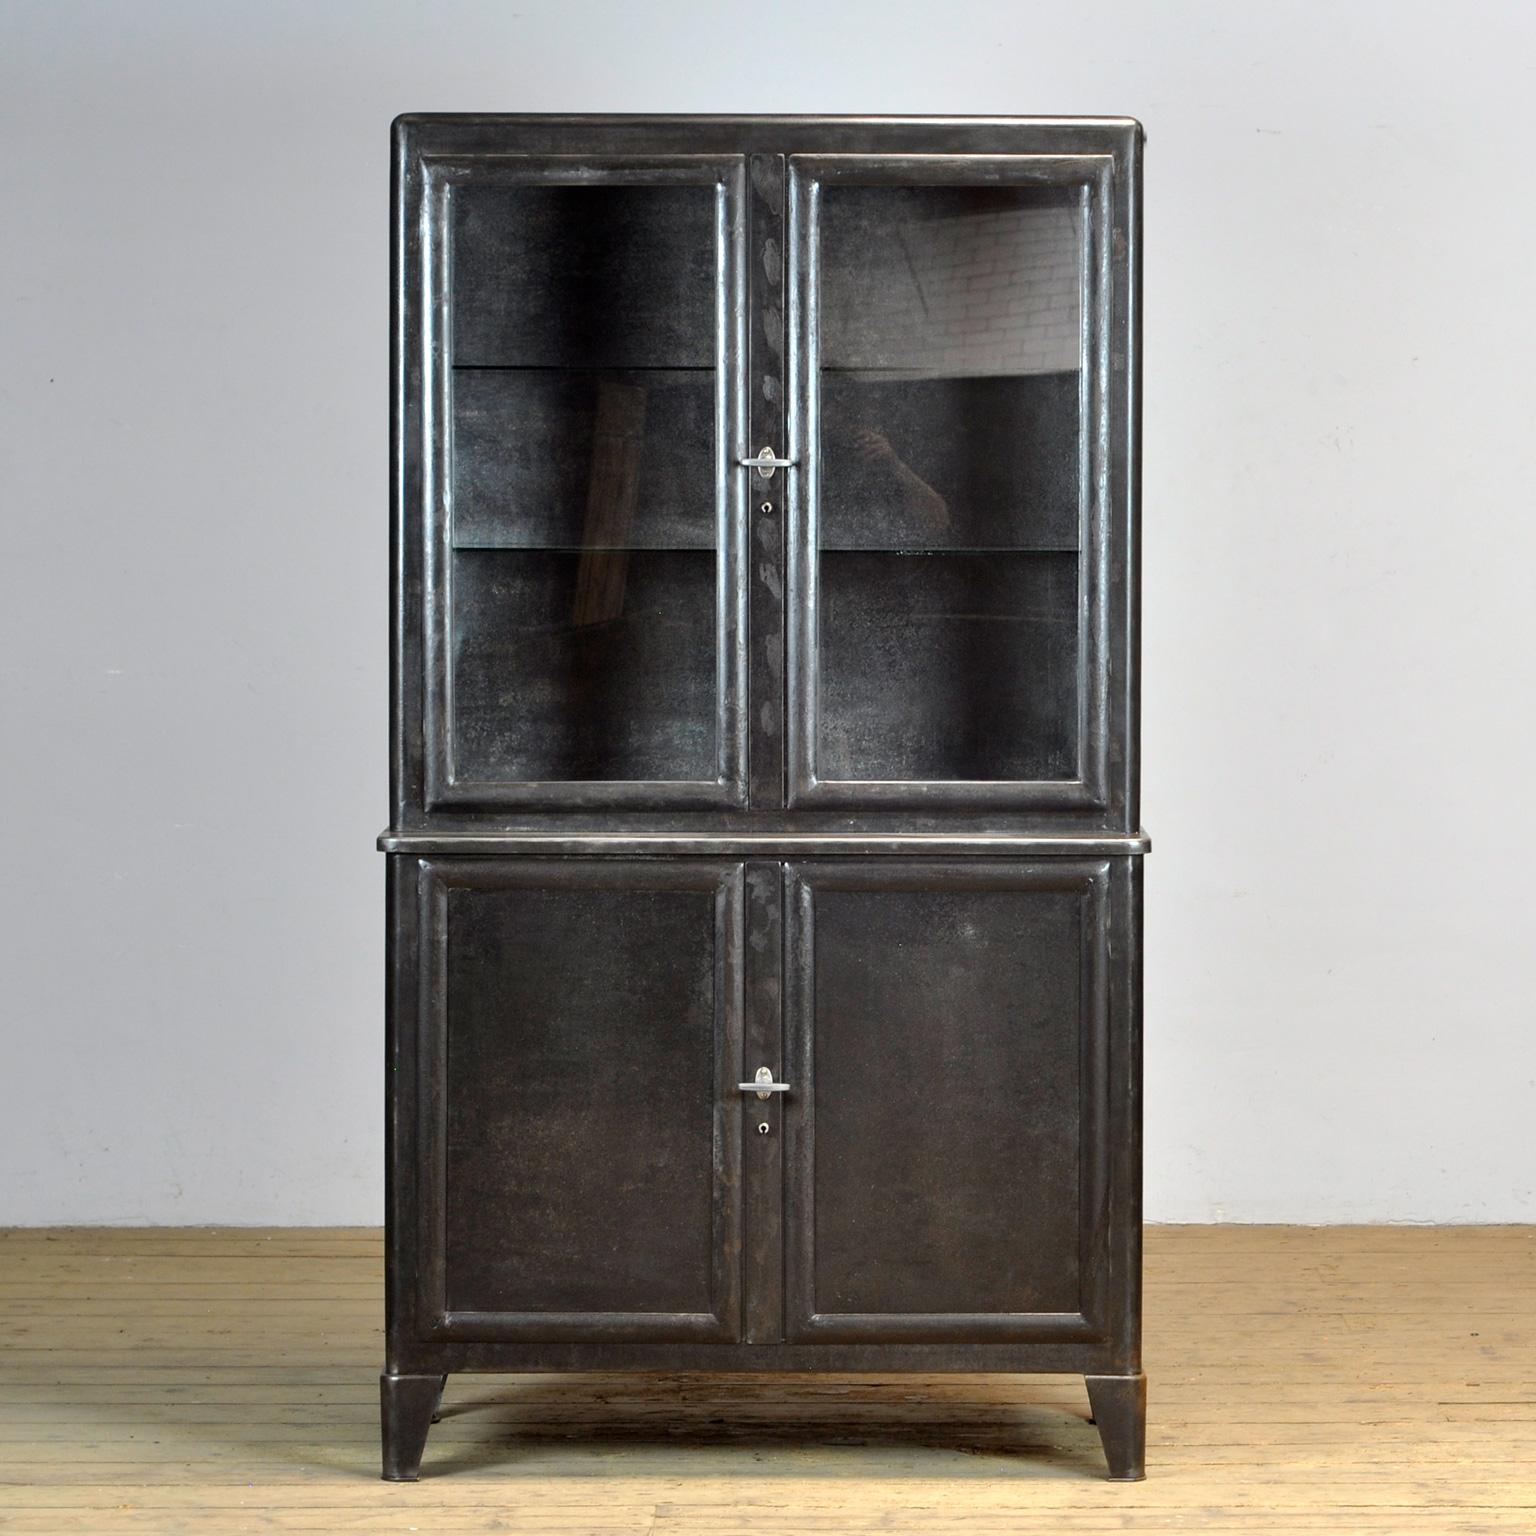 Set of medical cabinets produced by Brüder Fuchs, Germany in the 1930s. The cabinets have been stripped to the metal and treated against rust. At the top a display case with two glass shelves. In the lower part it is possible to make two more